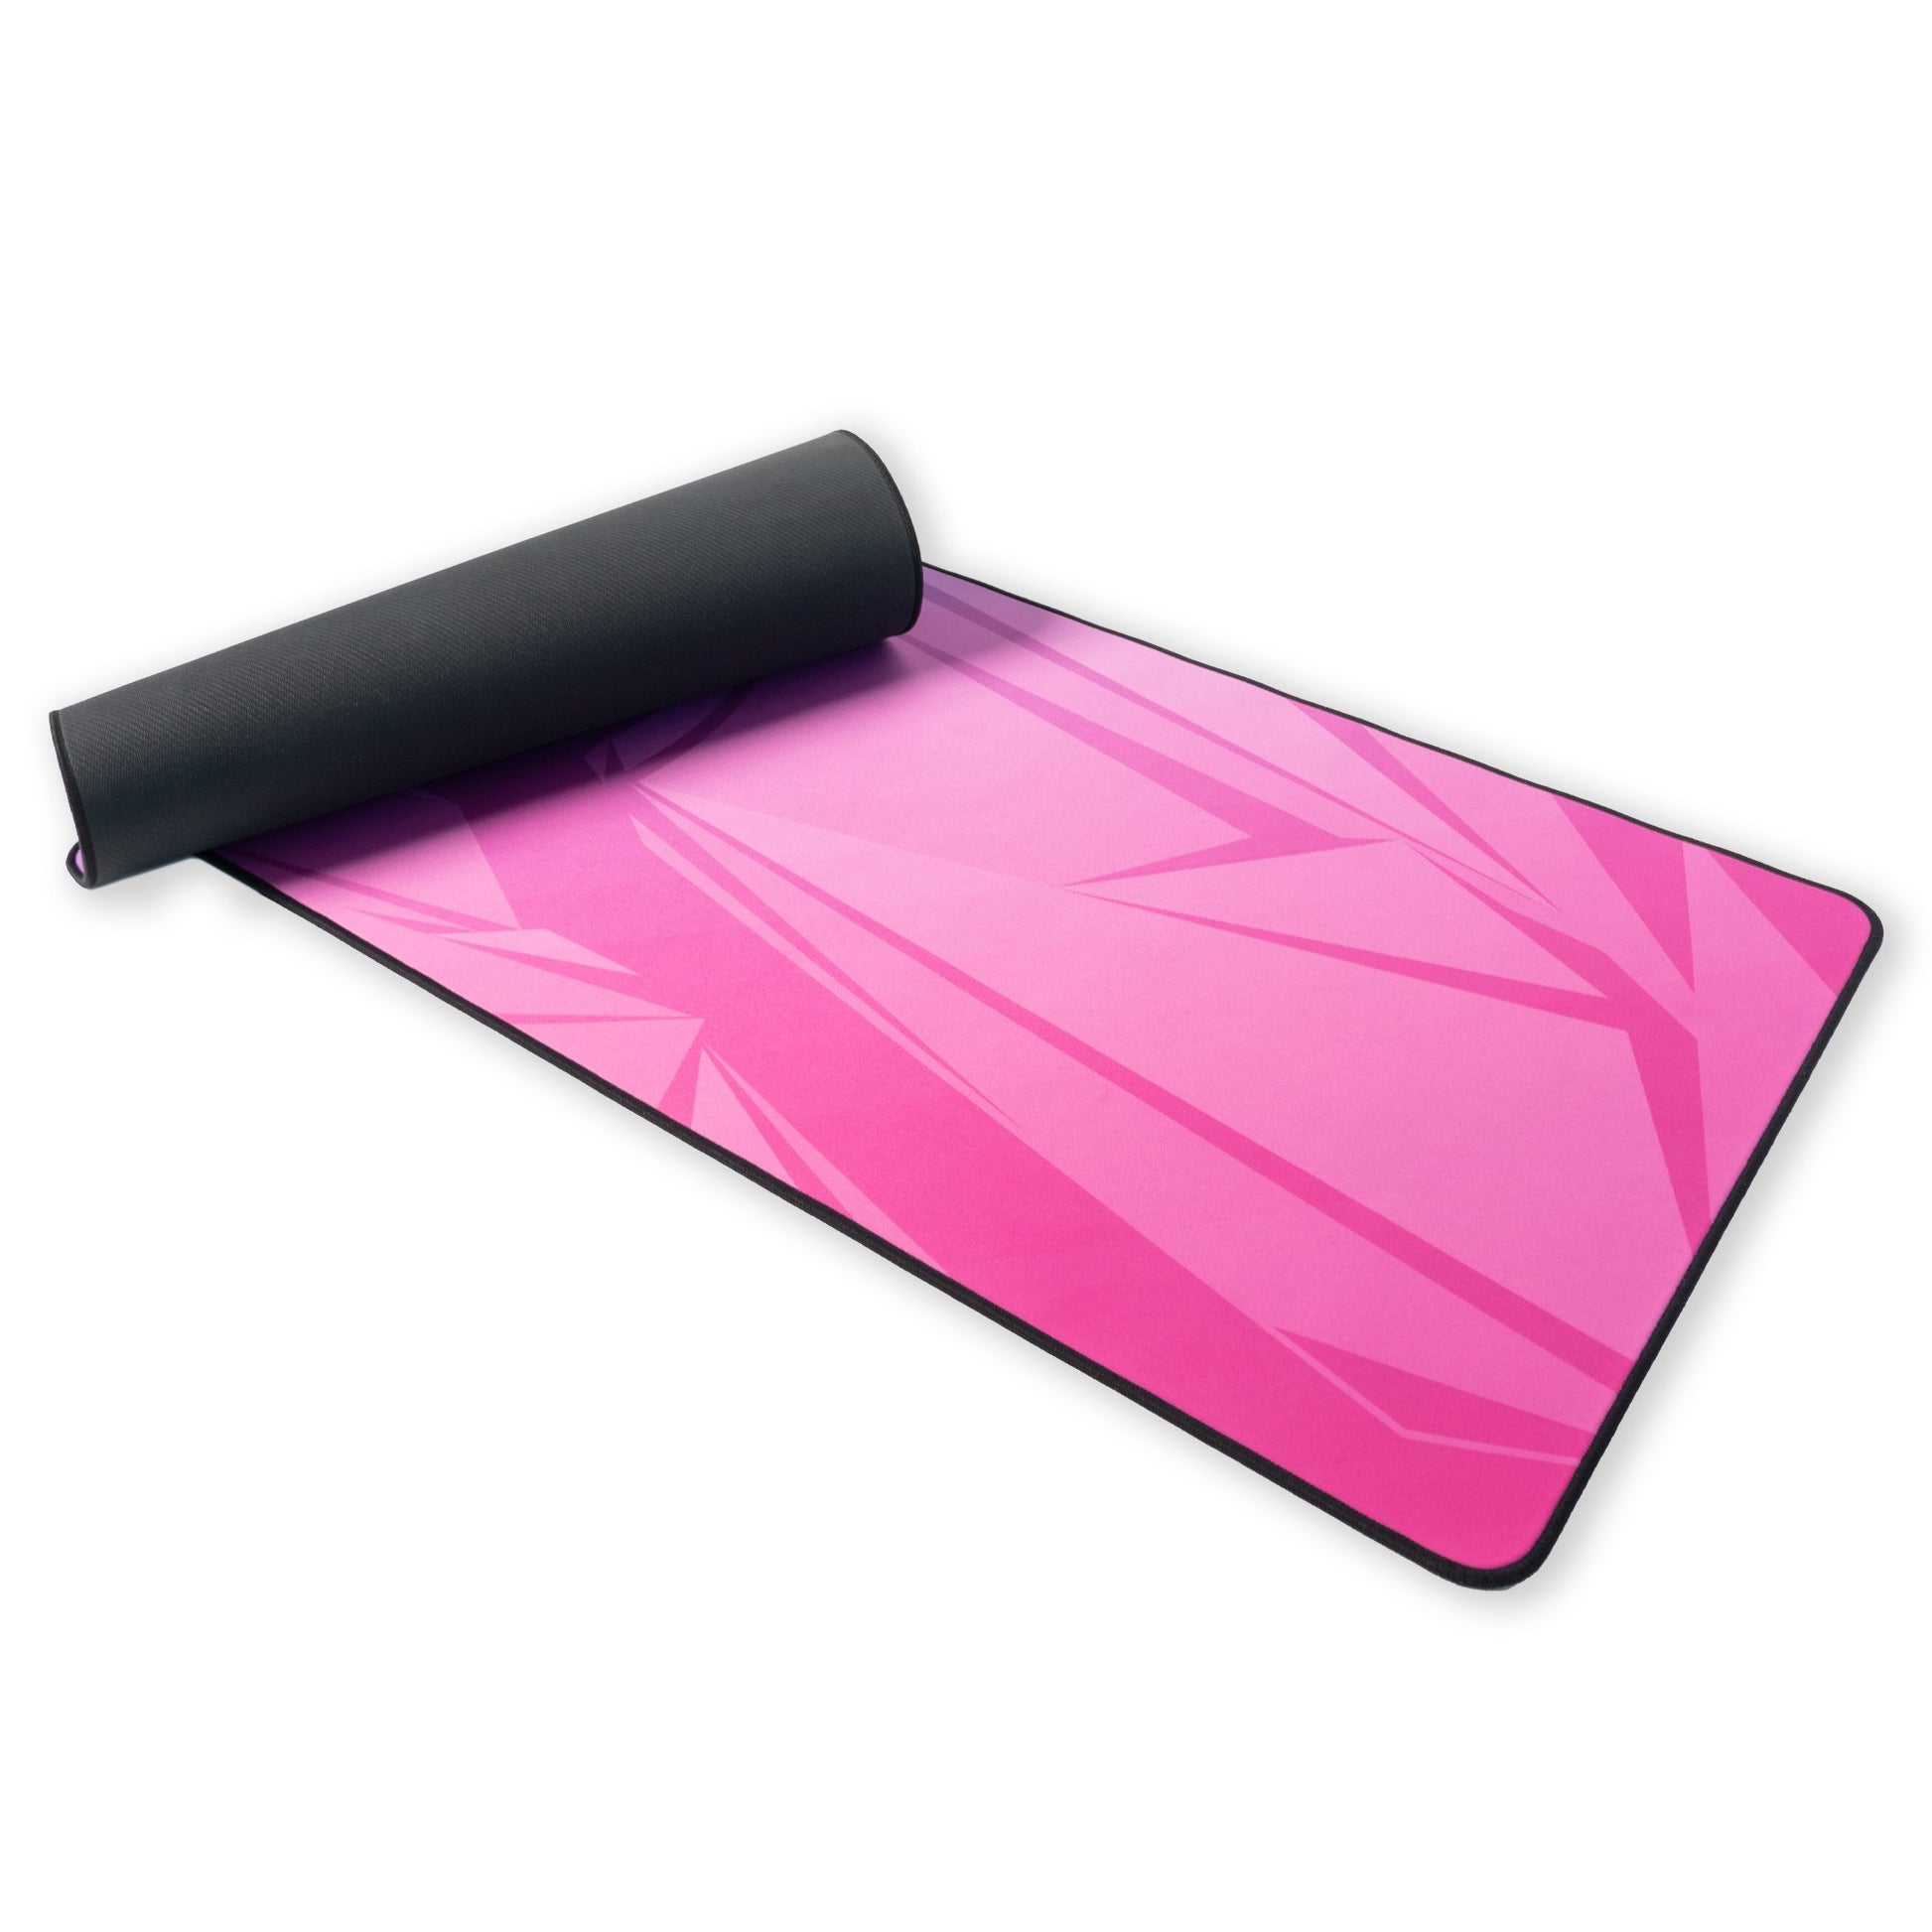 Neon PC Pro XL Gaming Mouse Pad